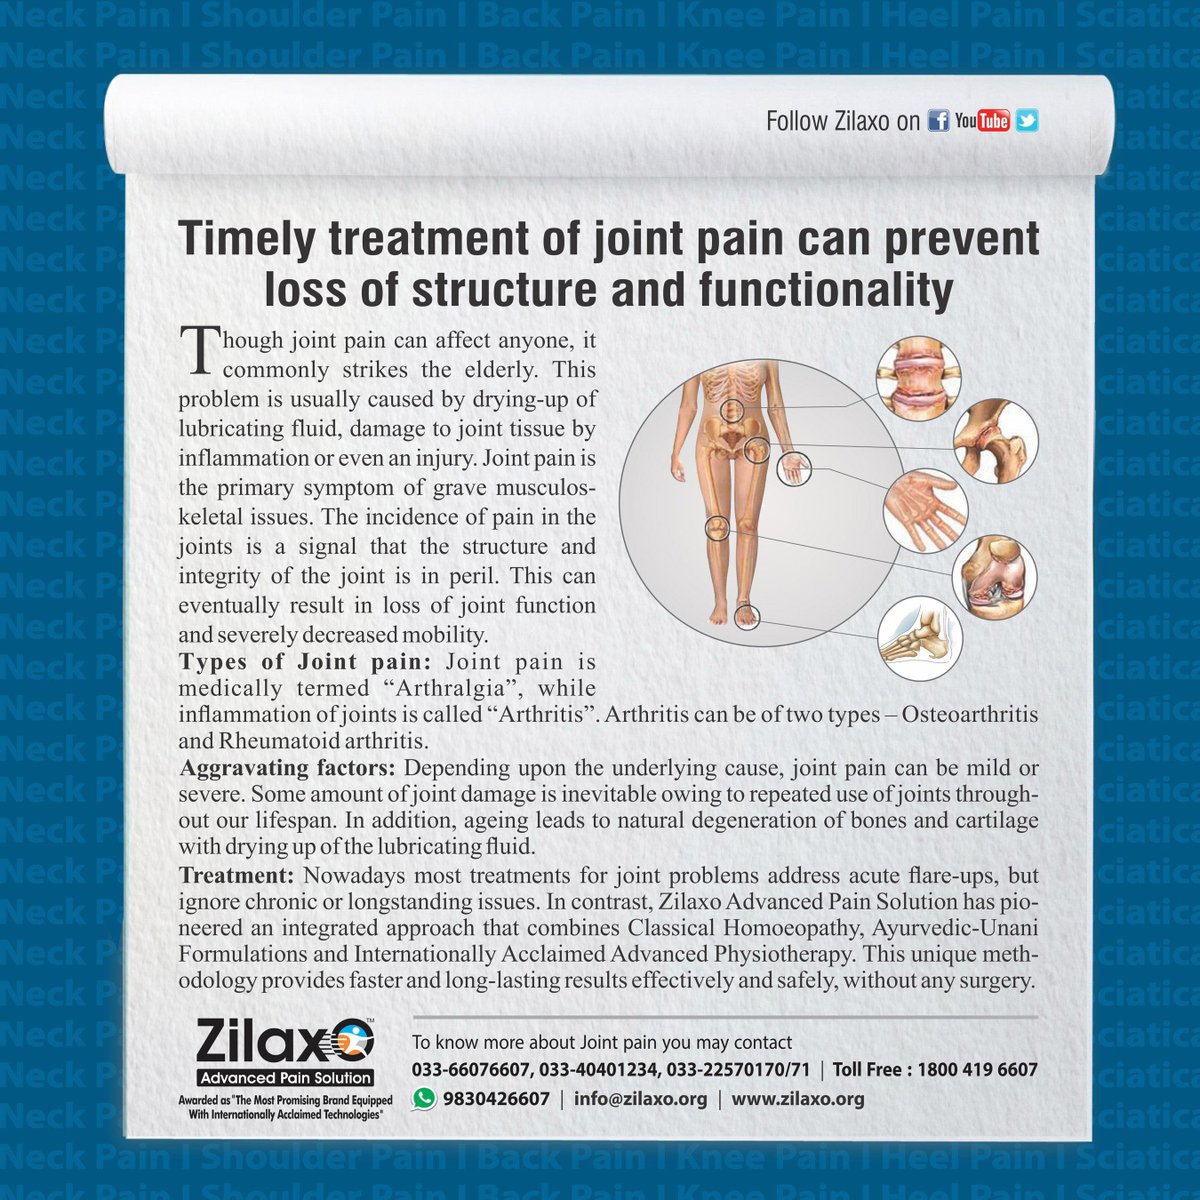 #JointPain #TimelyTreatment #prevent #Lossofstructure #Functionality #Factors #Treatment #ZilaxoAdvancedPainSolution
zilaxo.org